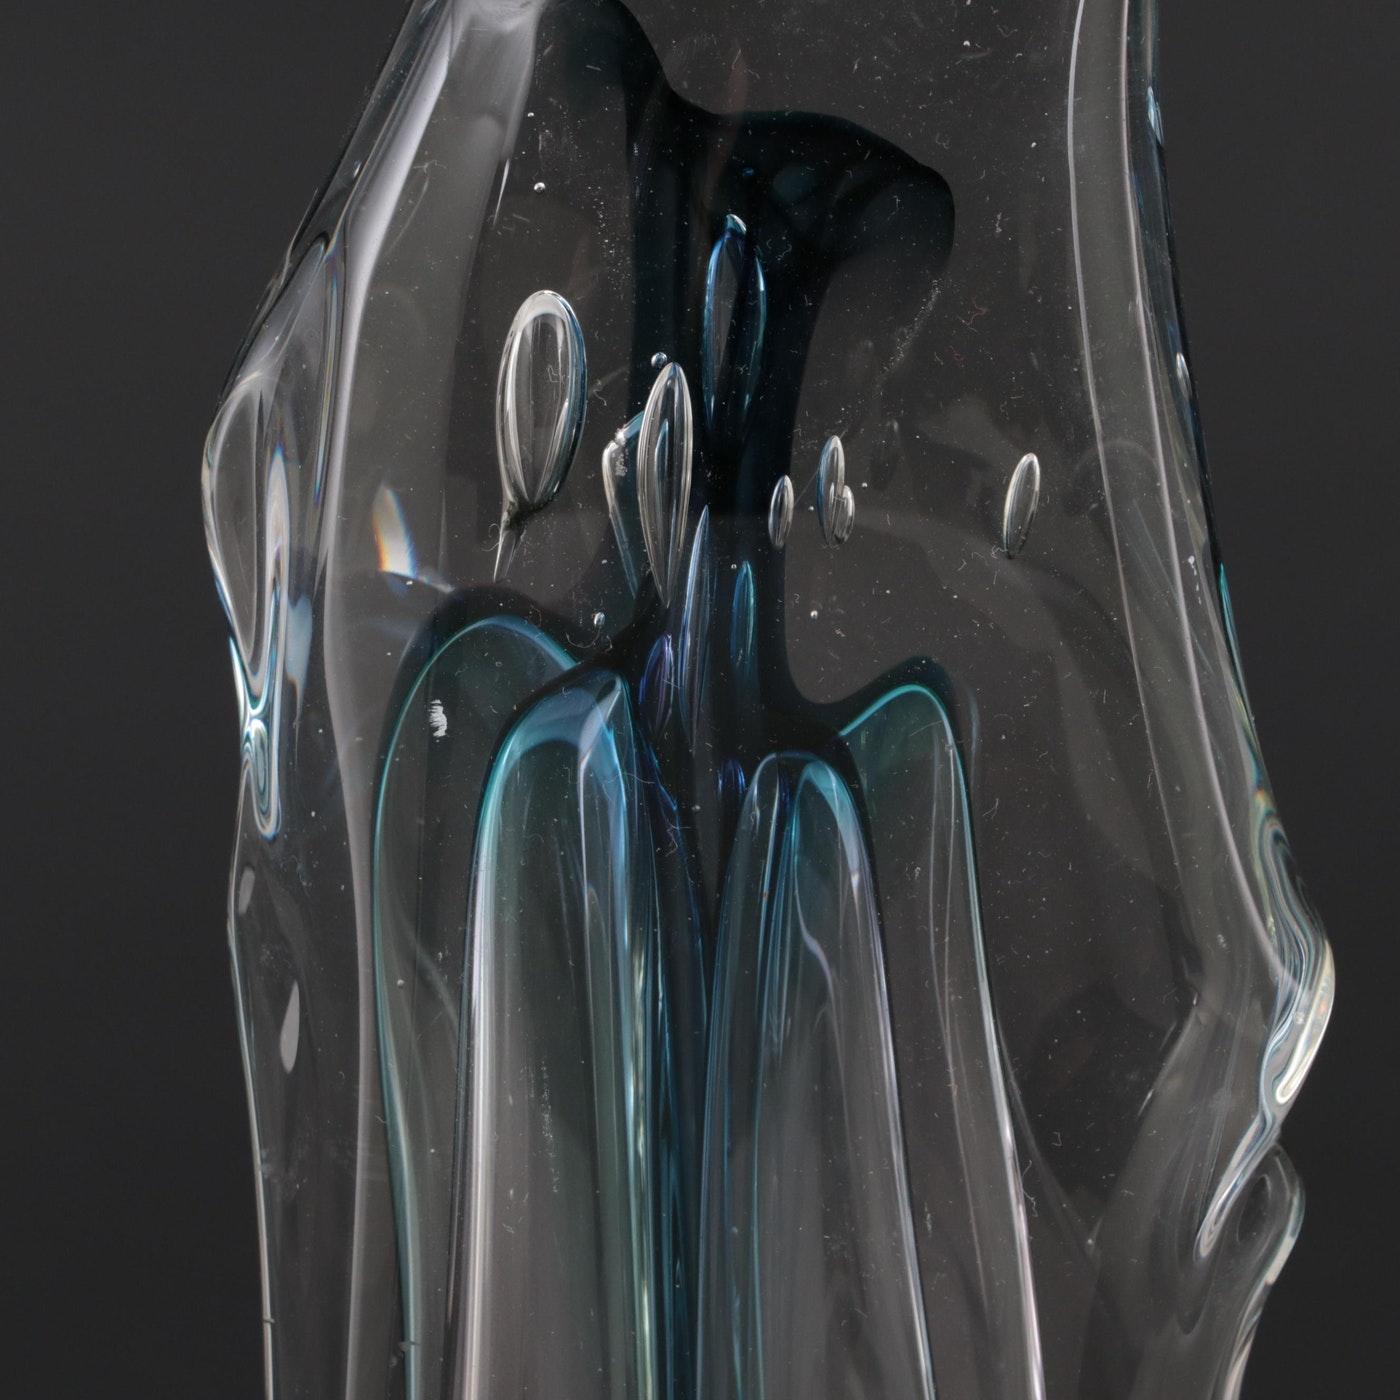 Paul Manners (United States, born 1946)

Untitled, late 20th century
Glass sculpture
Signed to the base
Numbered 81071

Introducing the Hand-Blown Art Glass Sculpture by Paul Manners, Signed. USA 1980's - a mesmerizing masterpiece that seamlessly